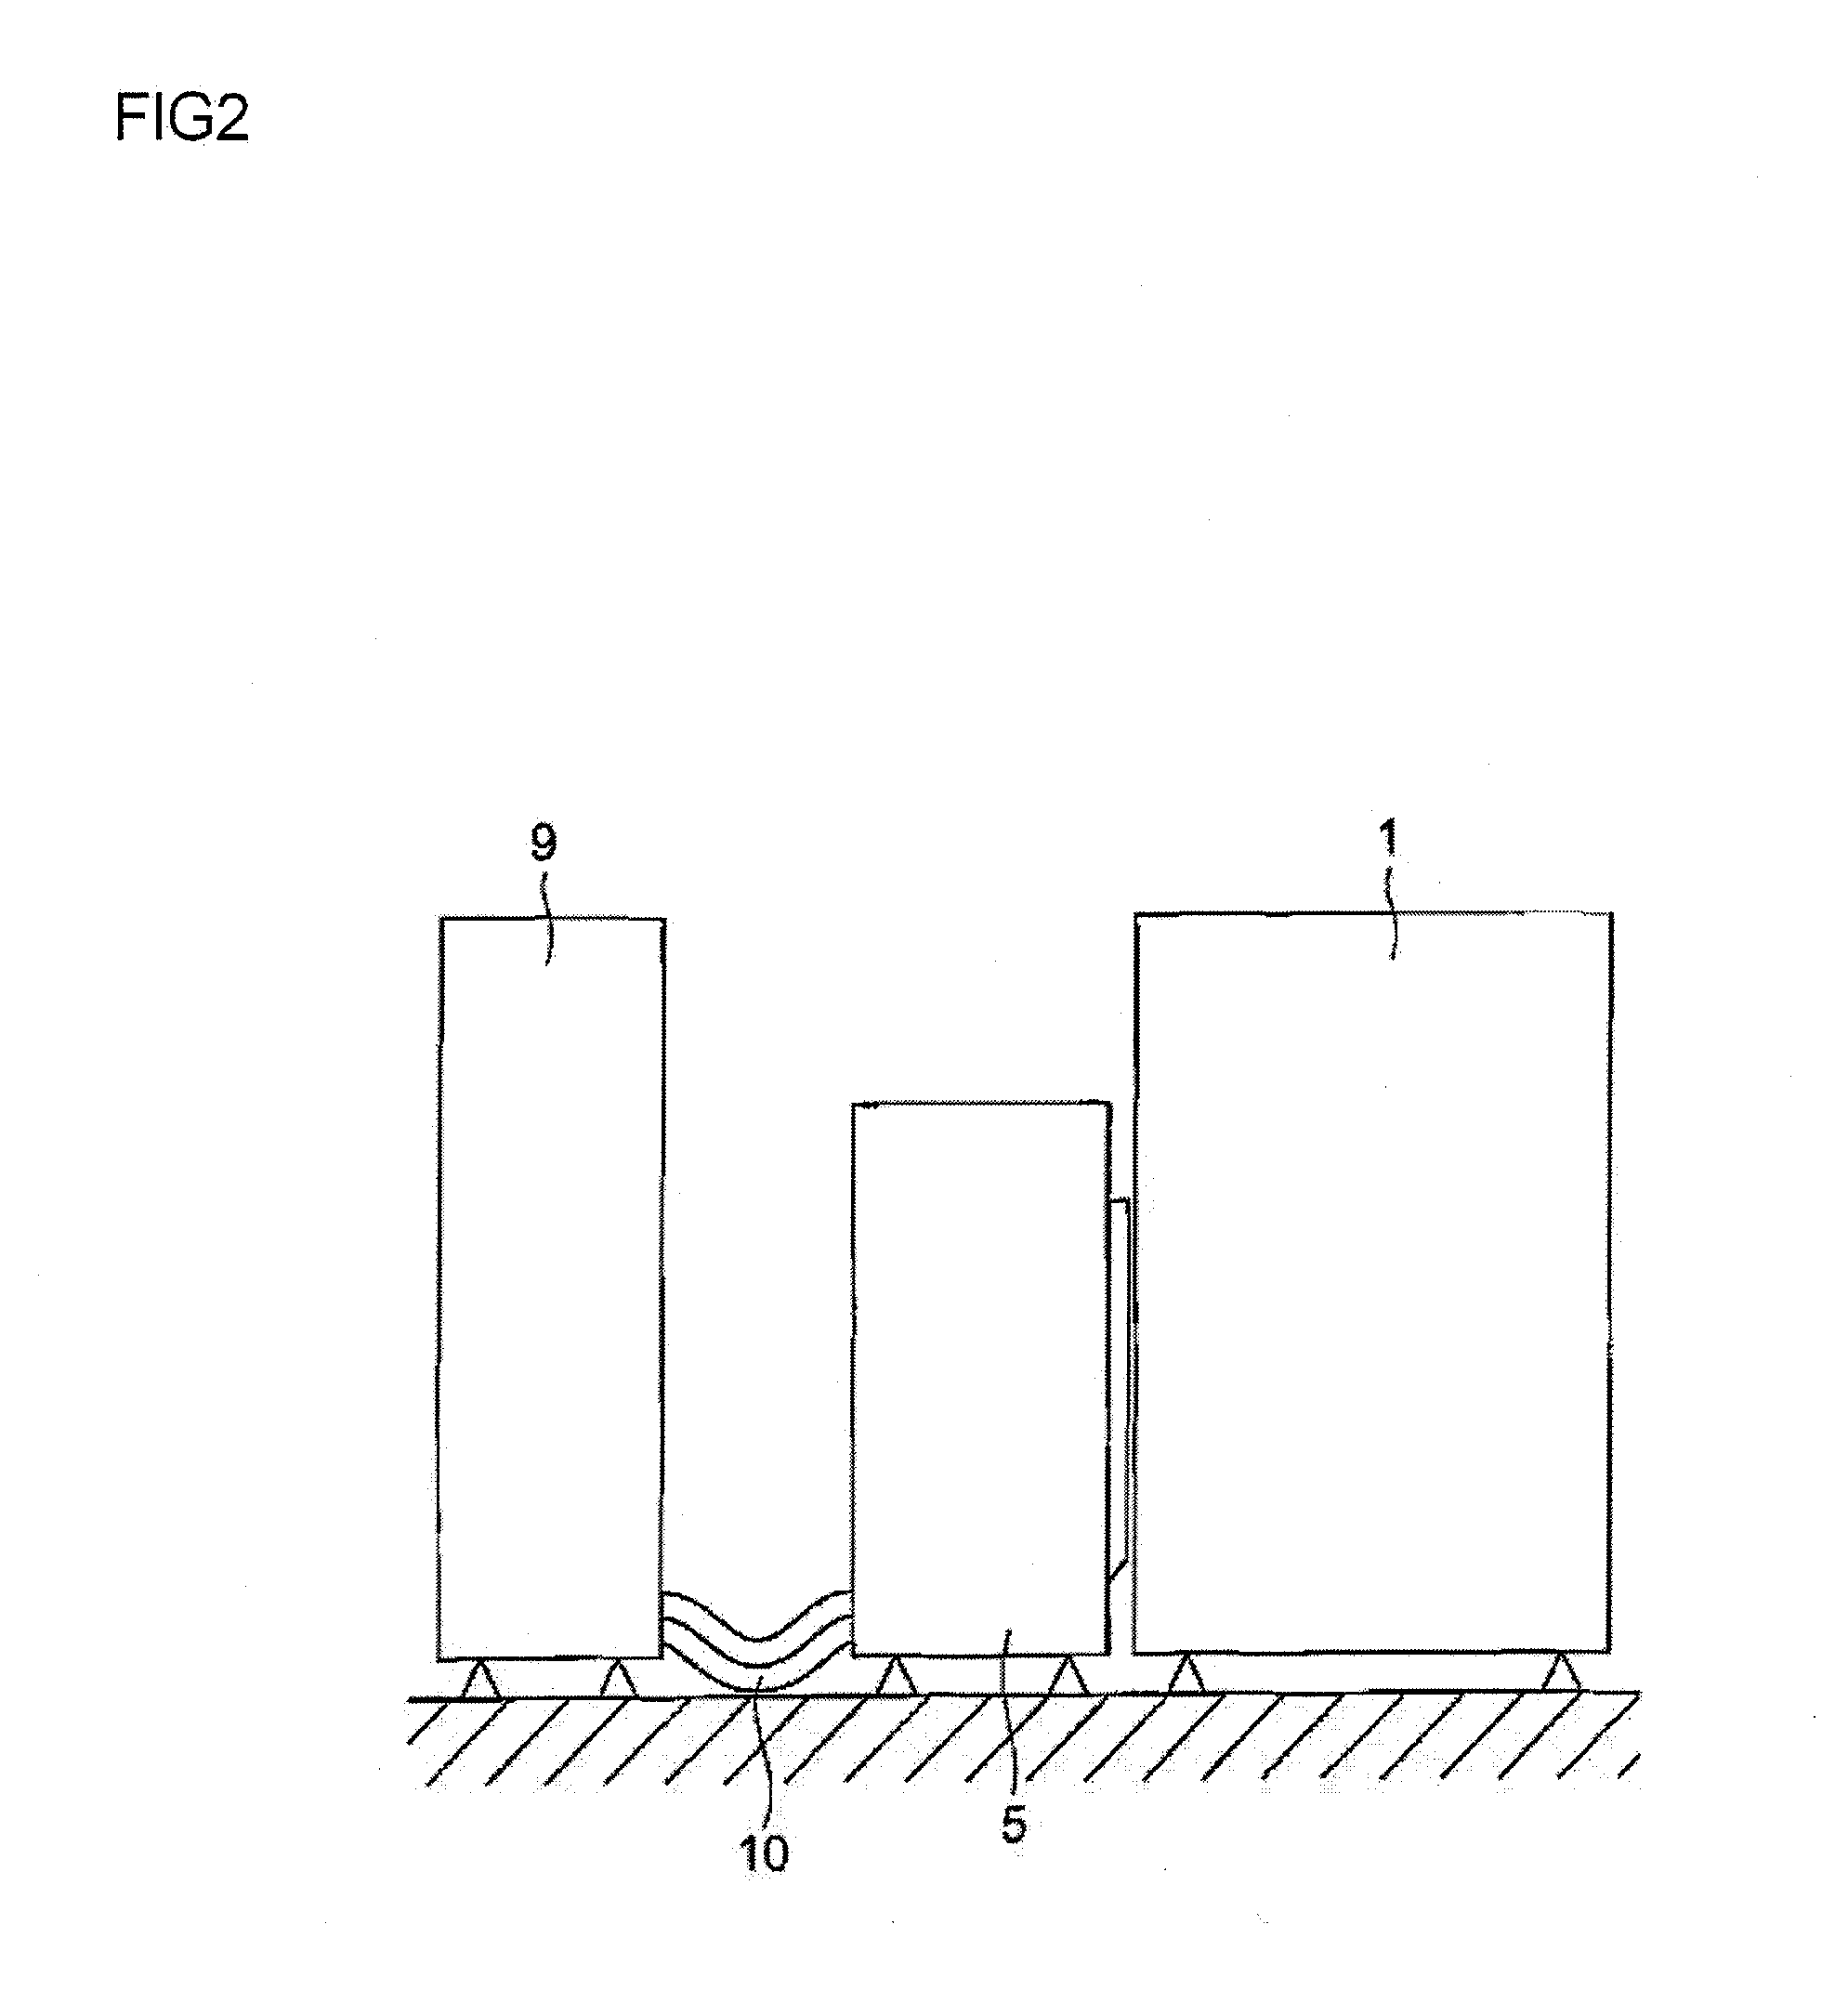 Electronic device test apparatus and method of testing electronic devices